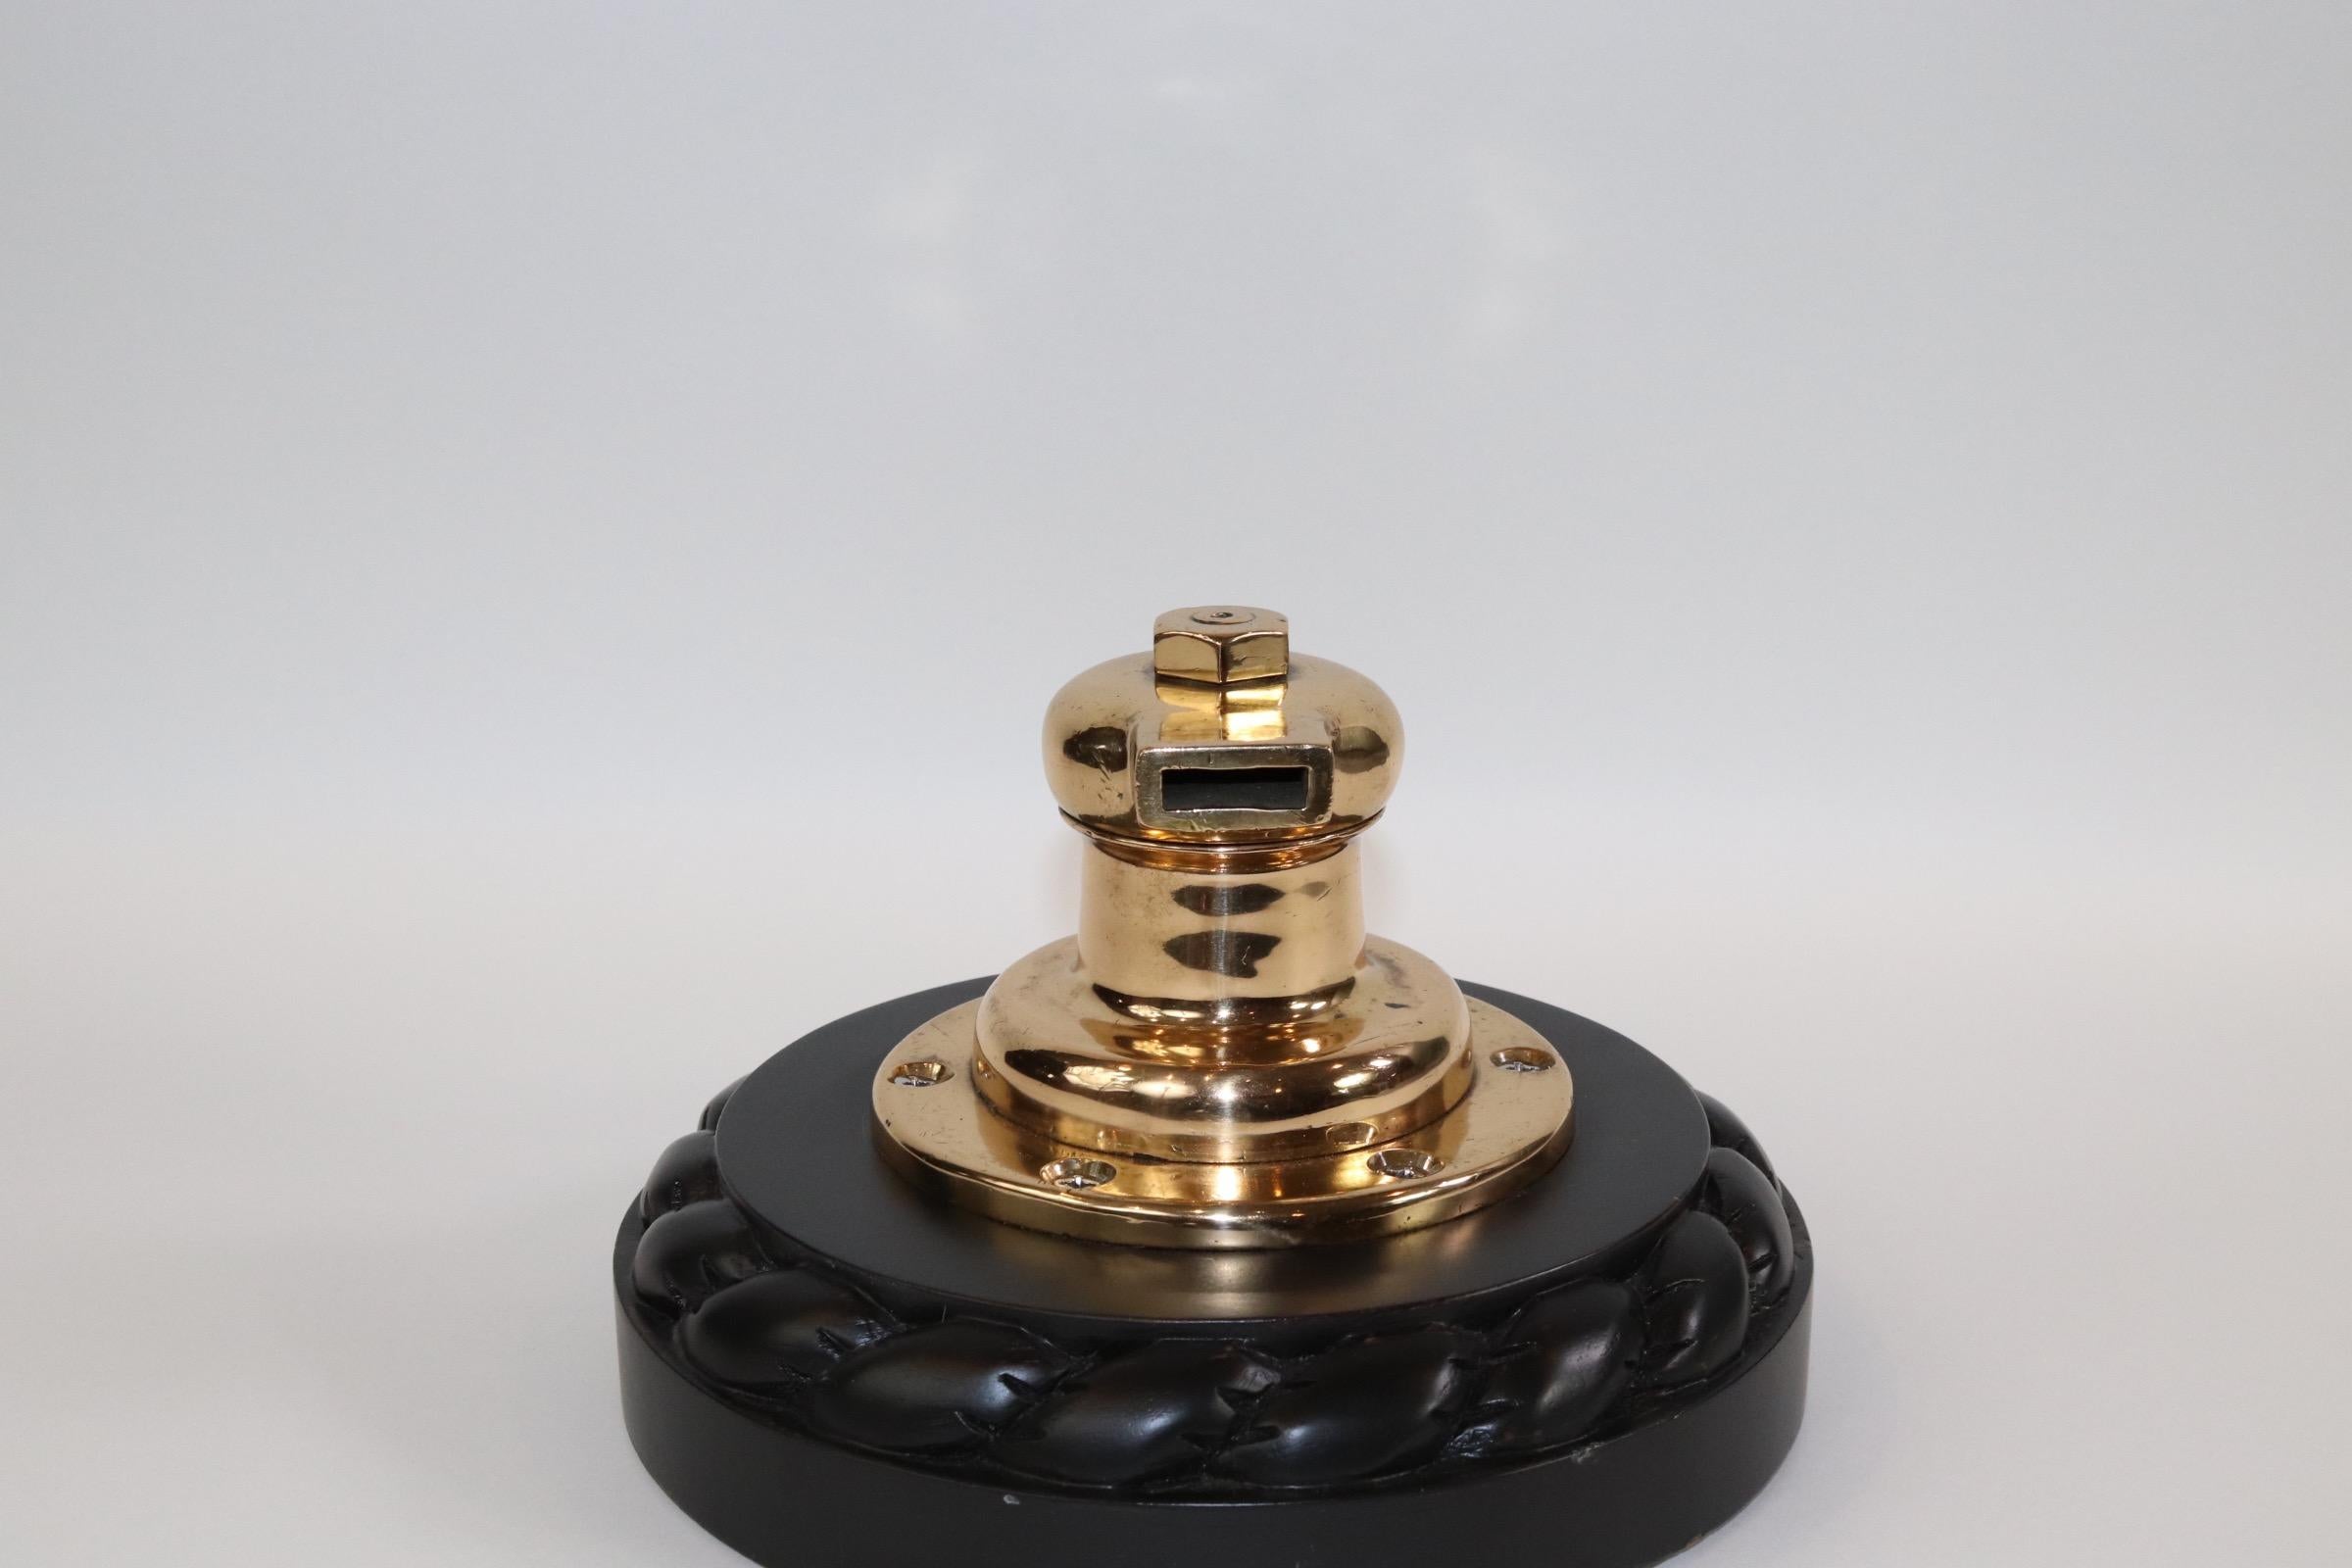 Quality geared yacht winch that has been polished, lacquered and mounted to a thick wood base with carved rope border. Weight is 11 pounds.